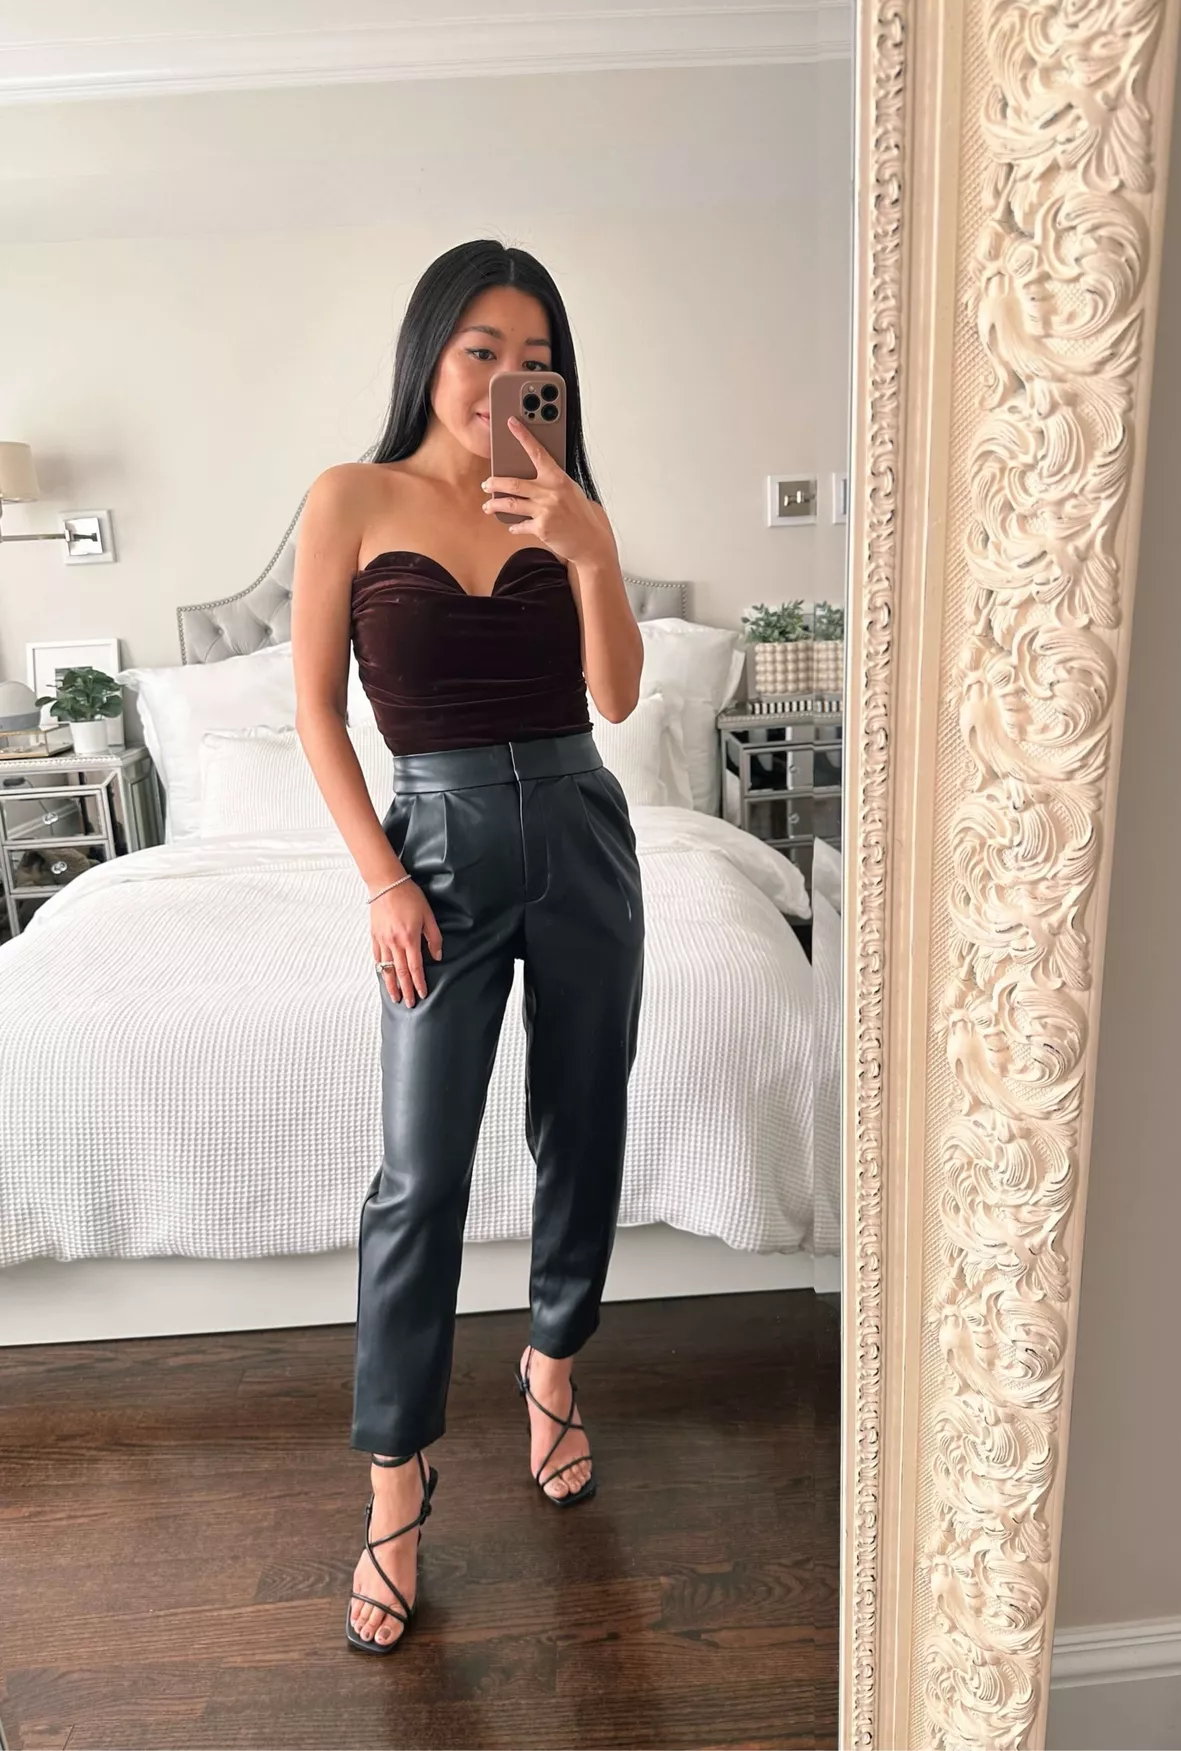 How to Style A Faux Leather Corset for Everyday Chic